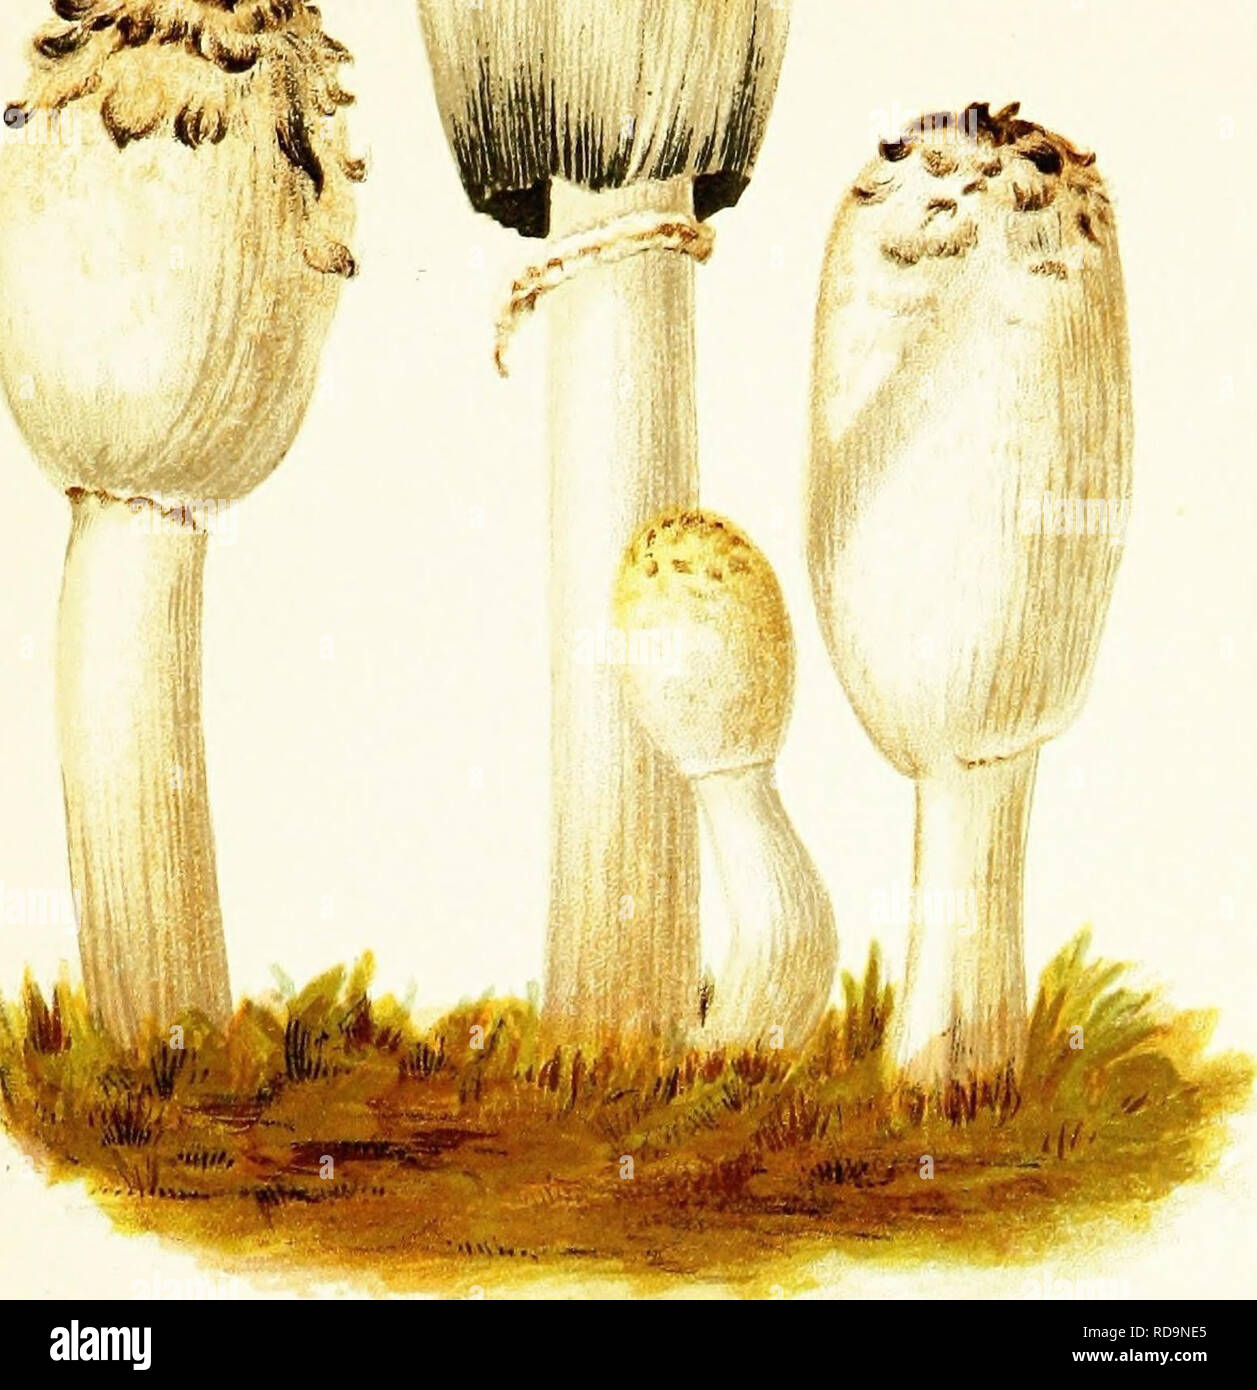 . Mushrooms of America, edible and poisonous. Mushrooms; Cookery (Mushrooms); cbk. PLATE II. COPRINUS COMATUS, OR SHAGGY-MANED MUSHROOM. &lt;5 ^ ' â f^J**^ / : /â¢!! â â %.. 'X k. D E SC RI PT ION. PiLBUS. At first oval and hard; margin then separating from the stem; then equally cylindrical, margin turning black; finally expanded, and decaying by dissolution into inky fluid. Color of pQeus variable from brown to pure white, always woolly, shaggy, the cuticle coming off in layers like the scales of a fish. Gills. At first white, crowded; possibly pink, then dark purple, or black, and moist. St Stock Photo